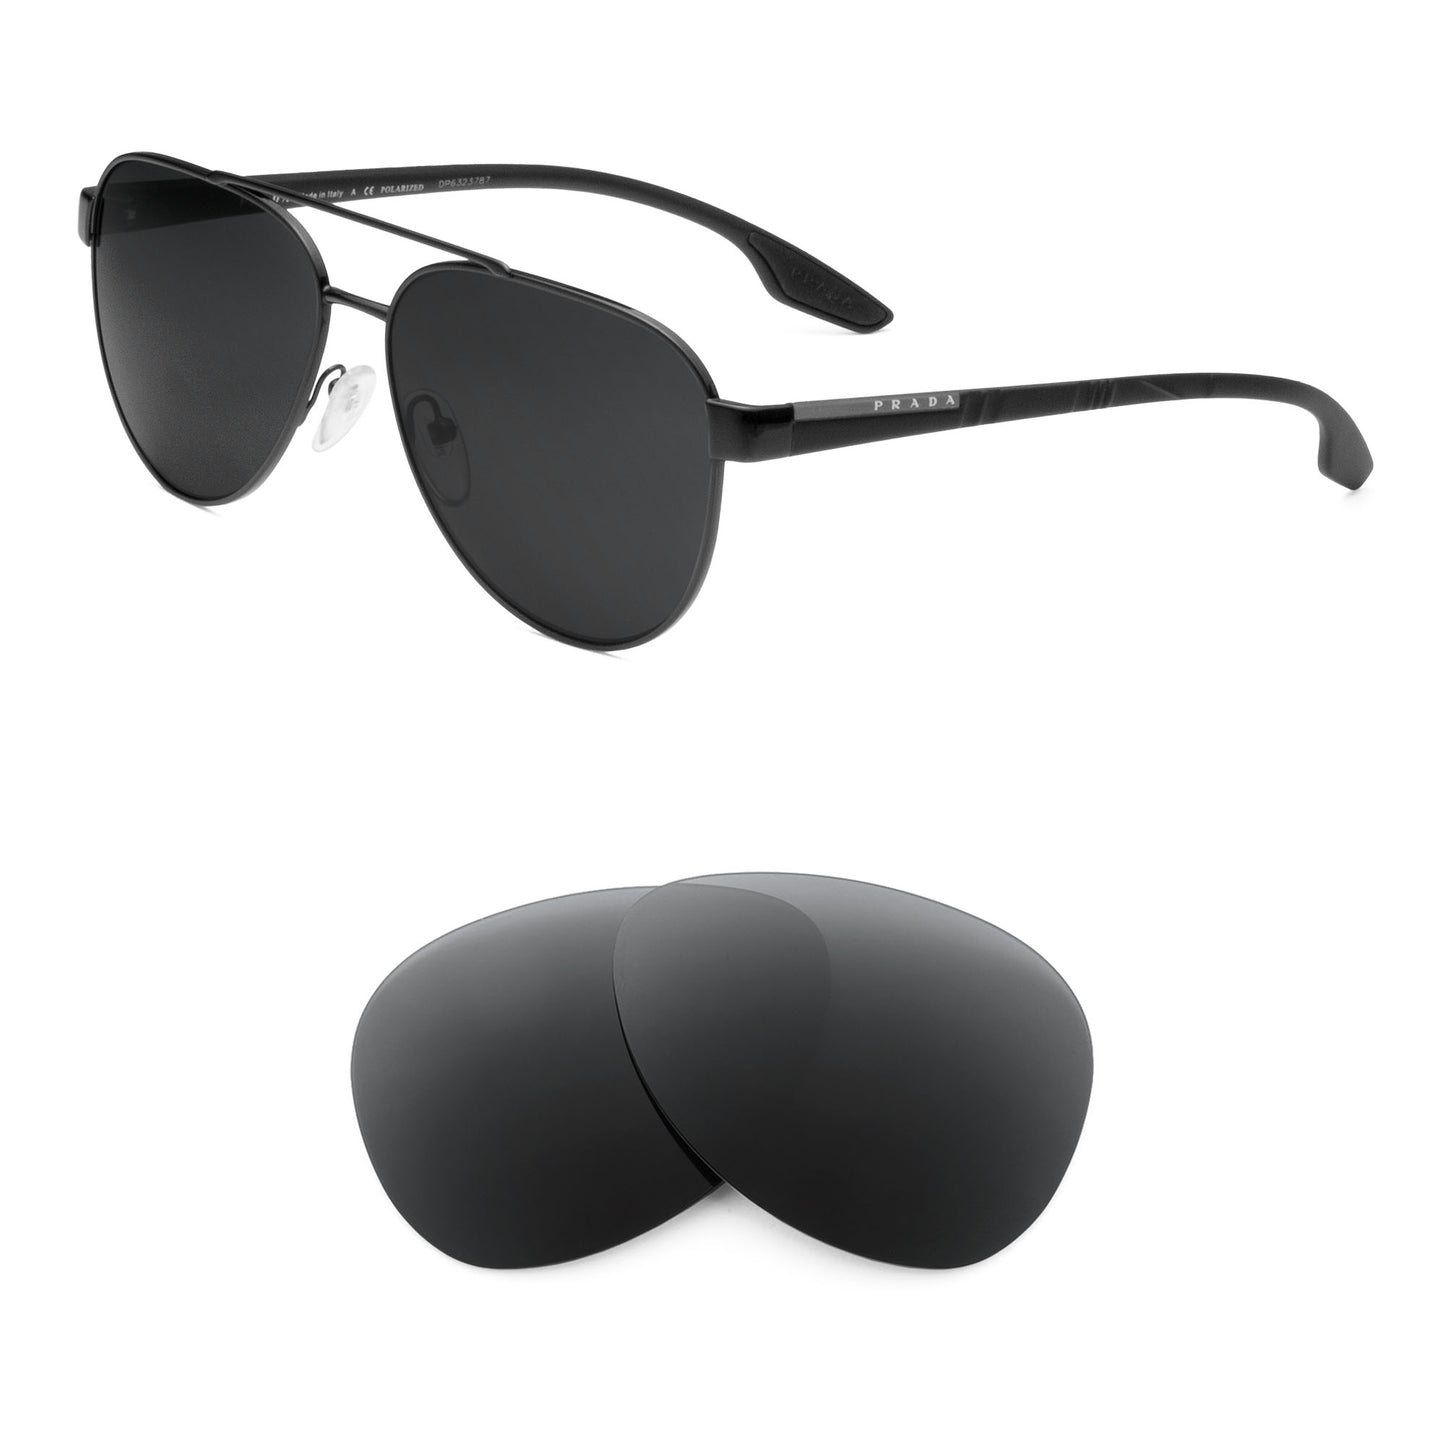 Prada SPS 54T sunglasses with replacement lenses